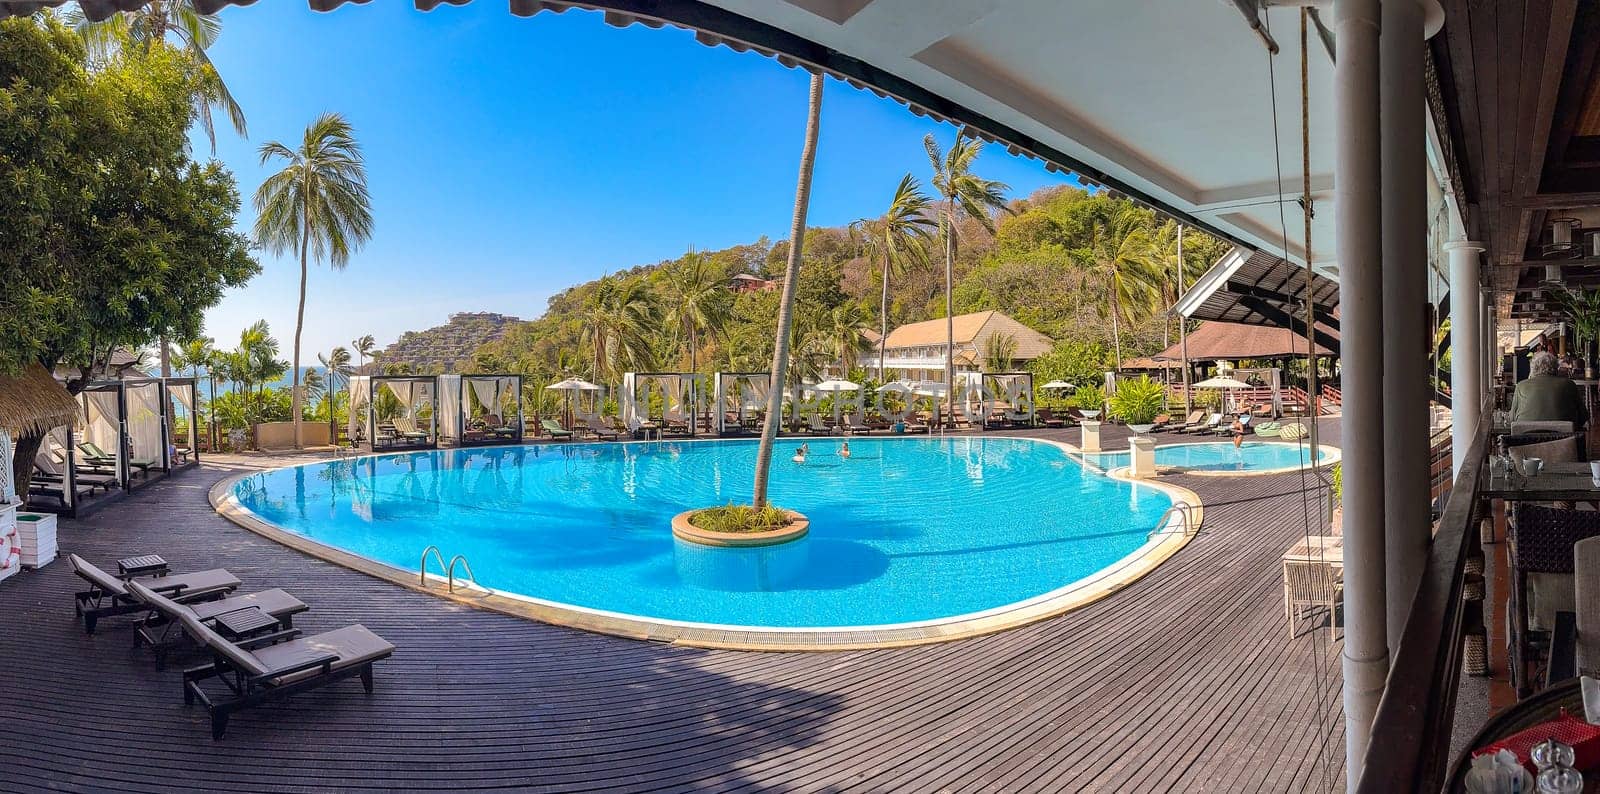 View of a pool resort in Panwa beach in Phuket, Thailand by worldpitou